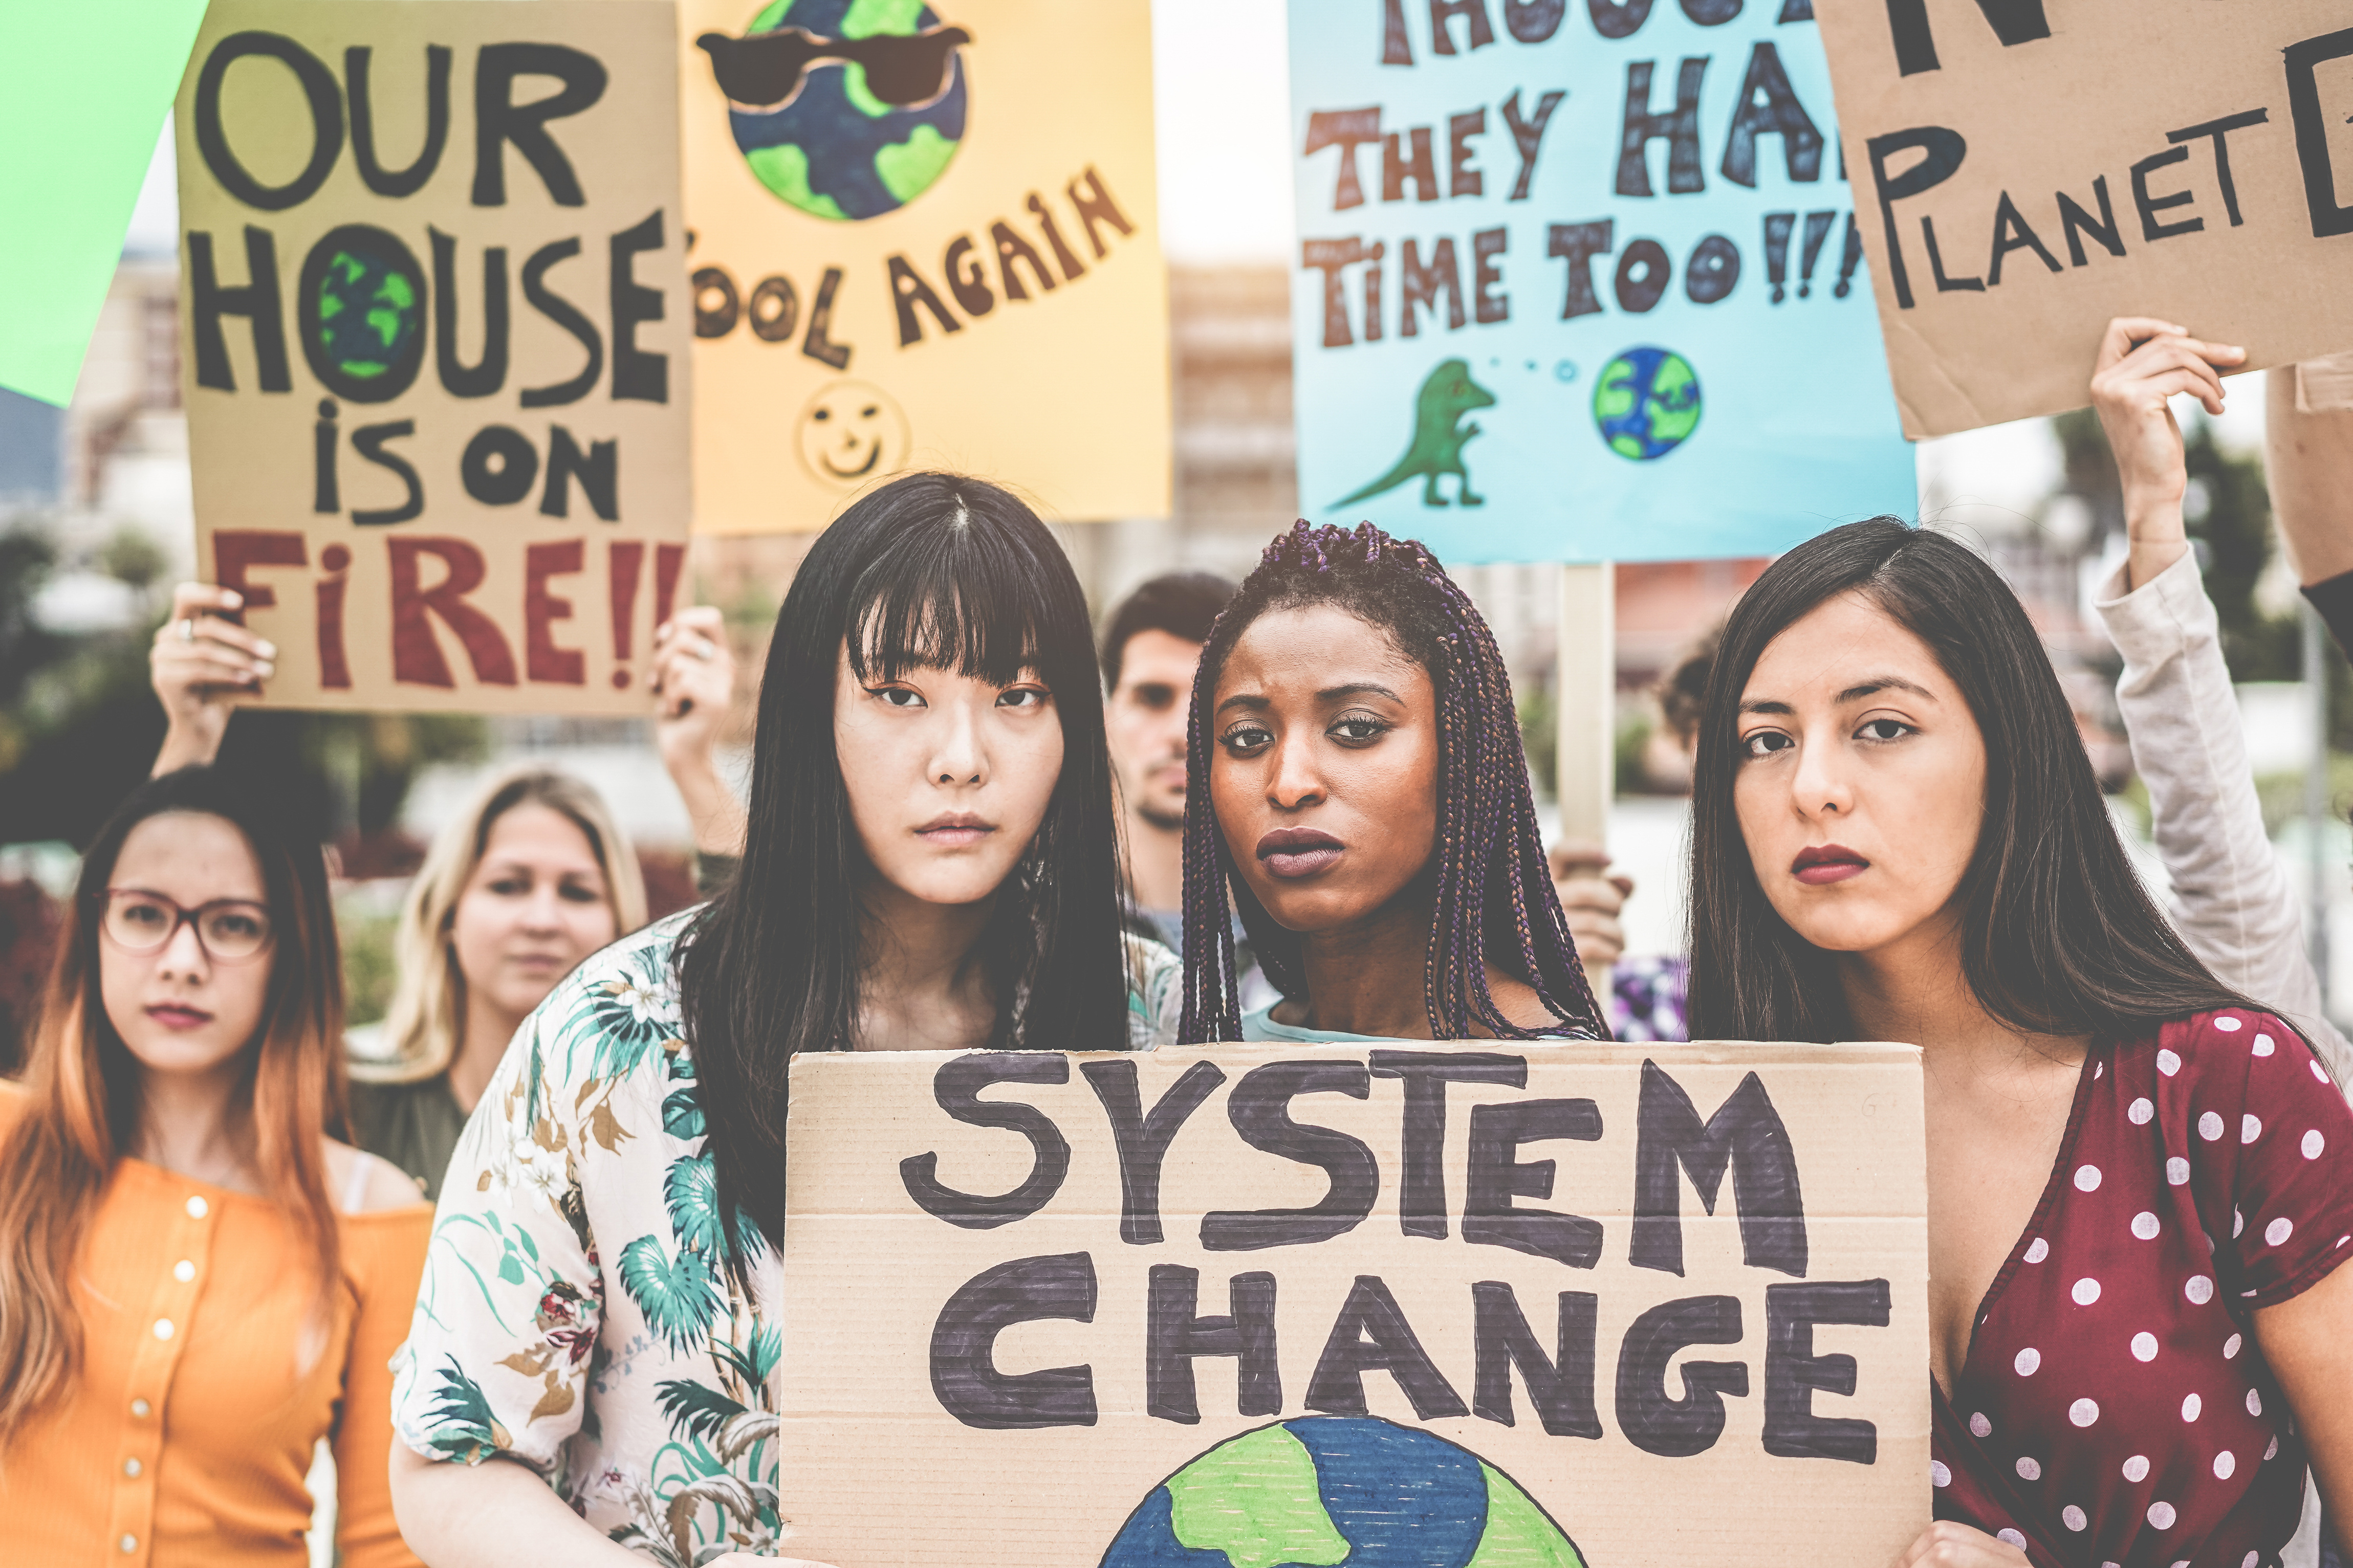 Three young people hold a sign that says "system change" as part of a protest